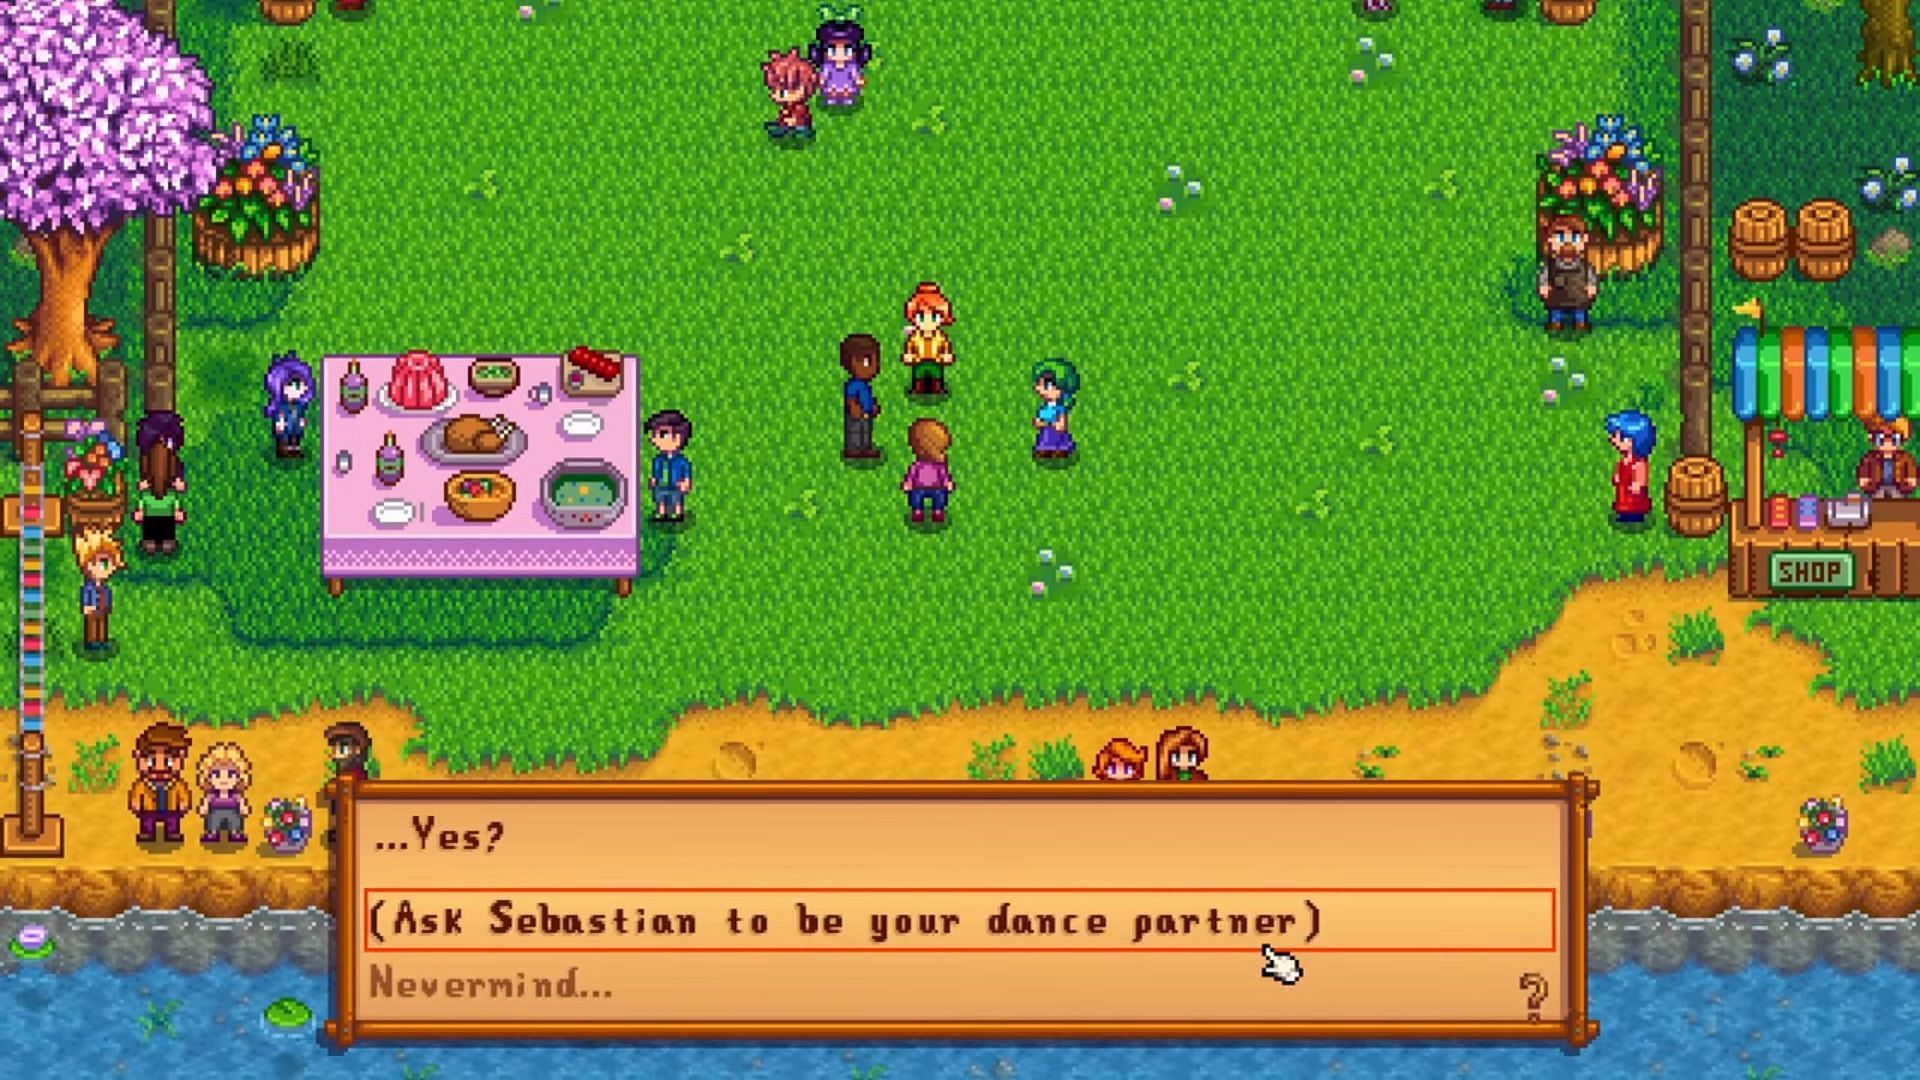 There are a variety of villagers whom you can ask (Image via ConcernedApe II Cozy Bird Gaming on YouTube)